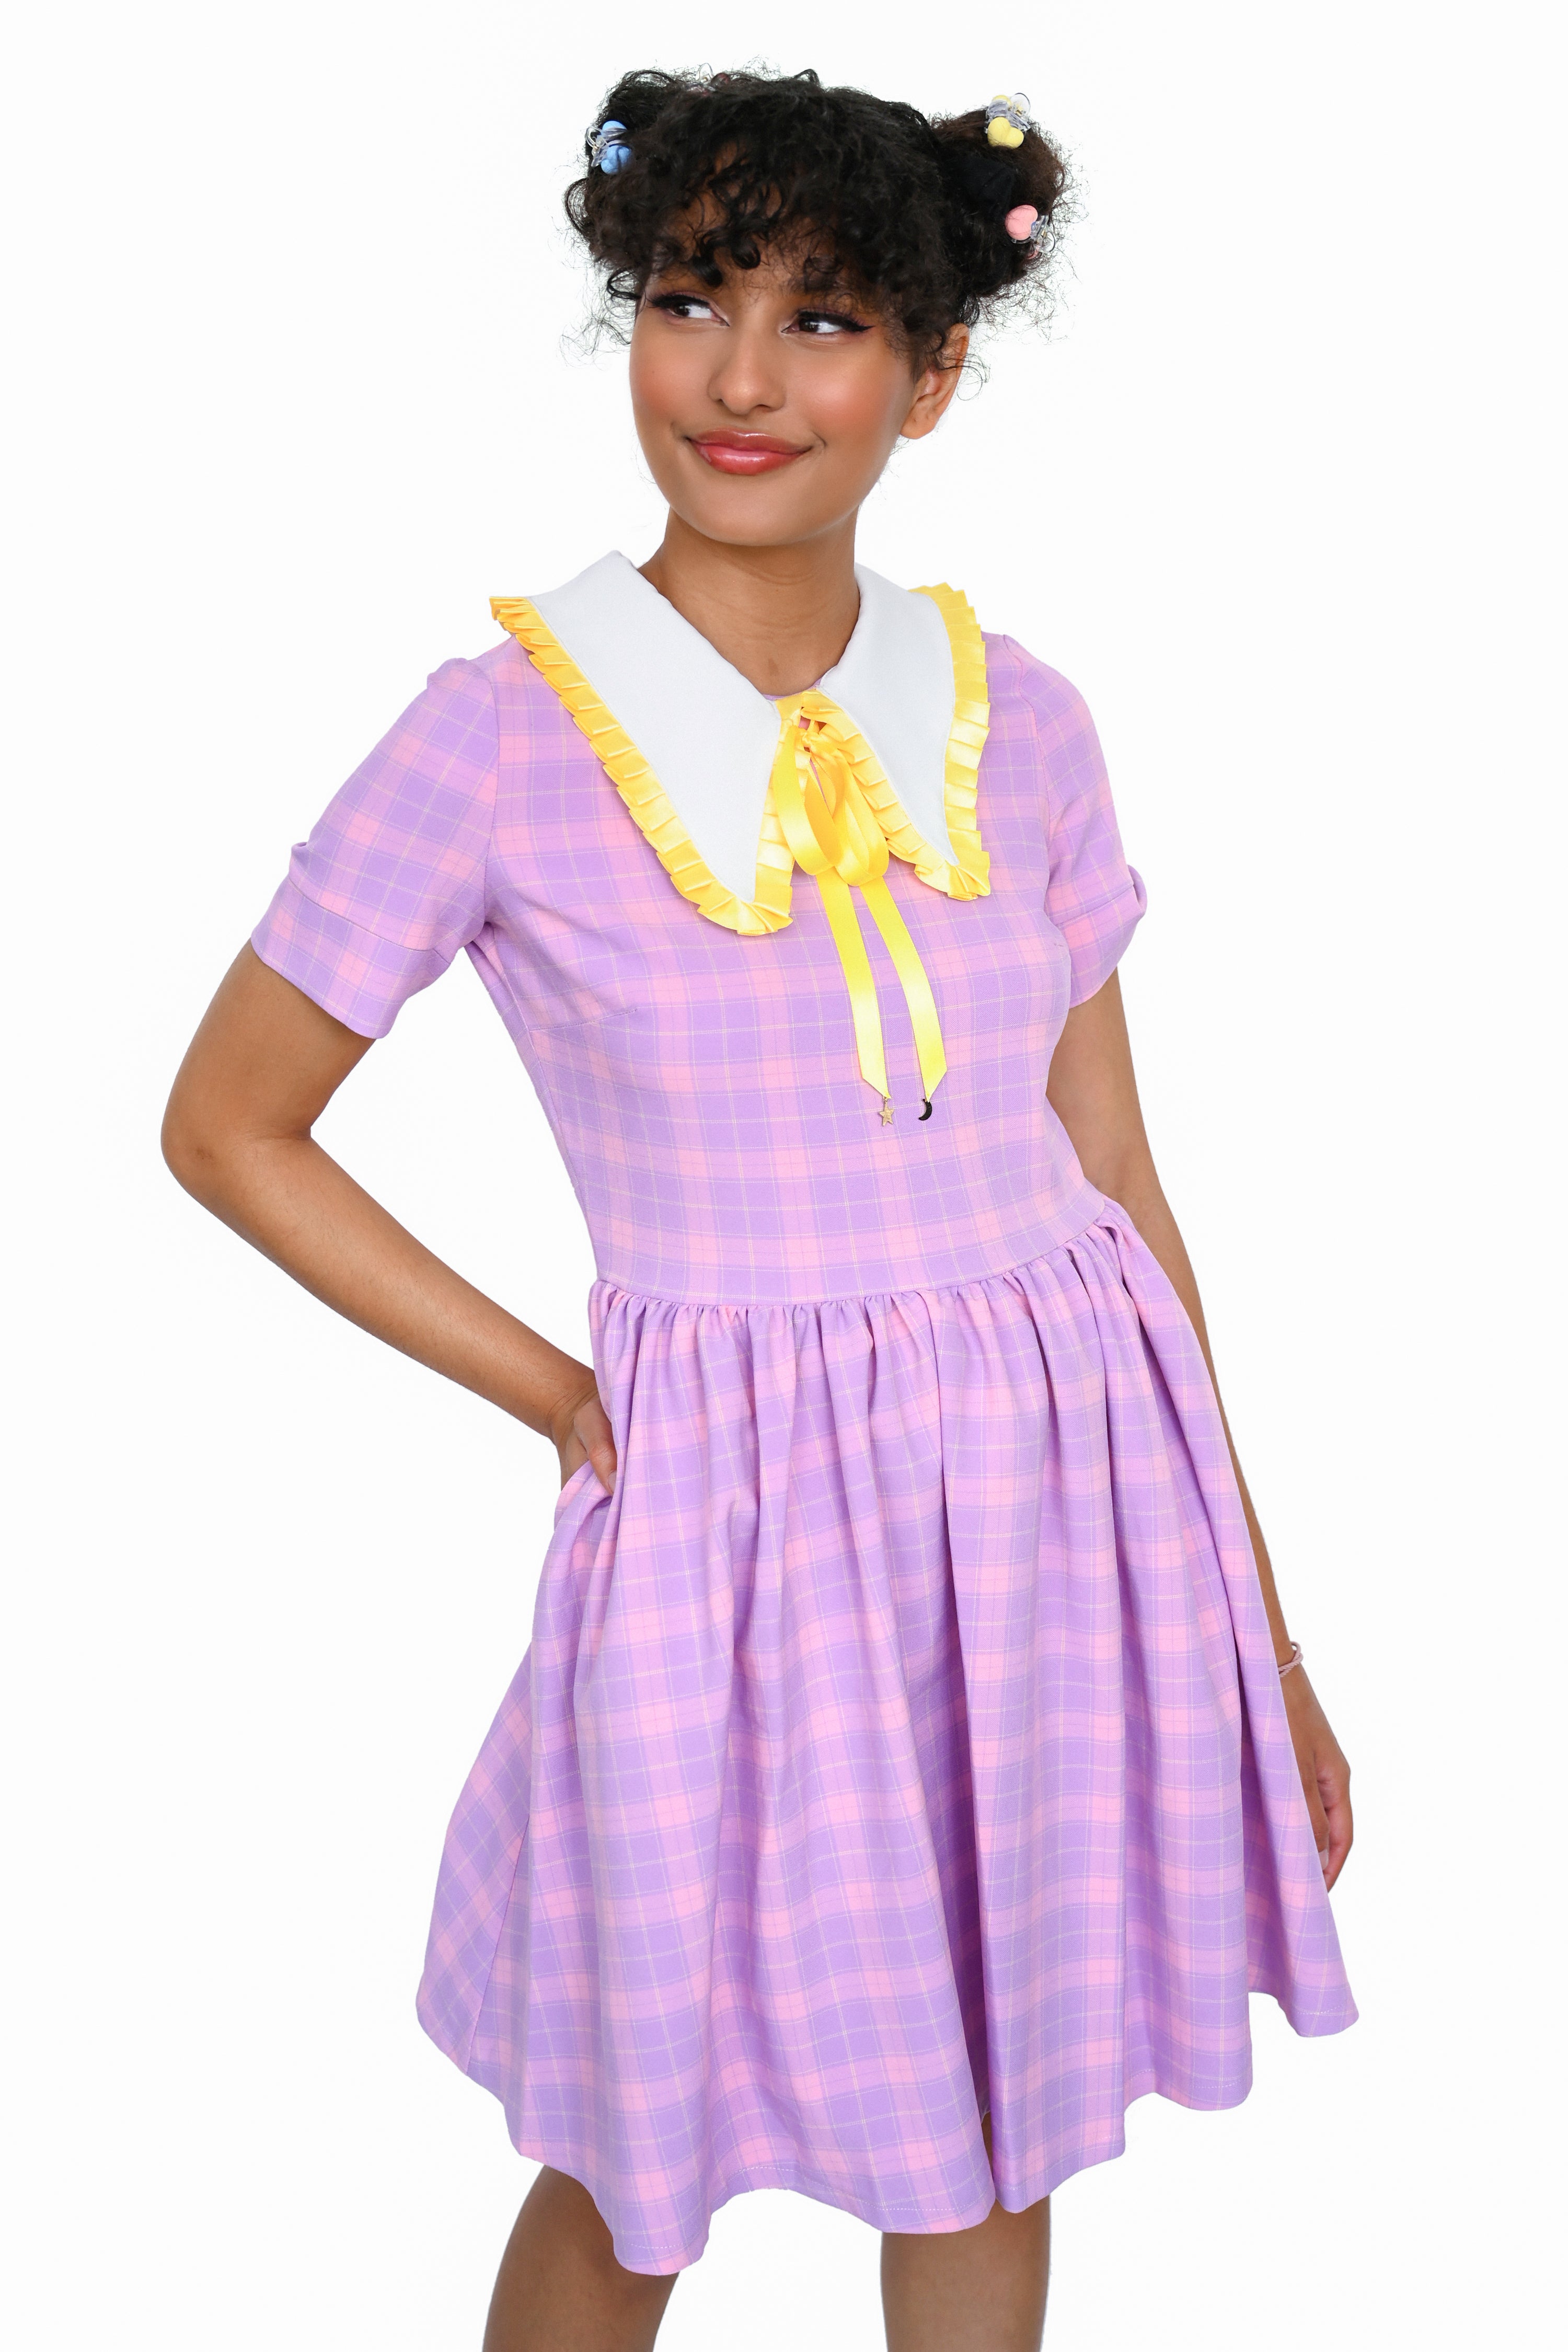 Lavender and pink plaid short sleeve dress with white collar and yellow ribbon trim